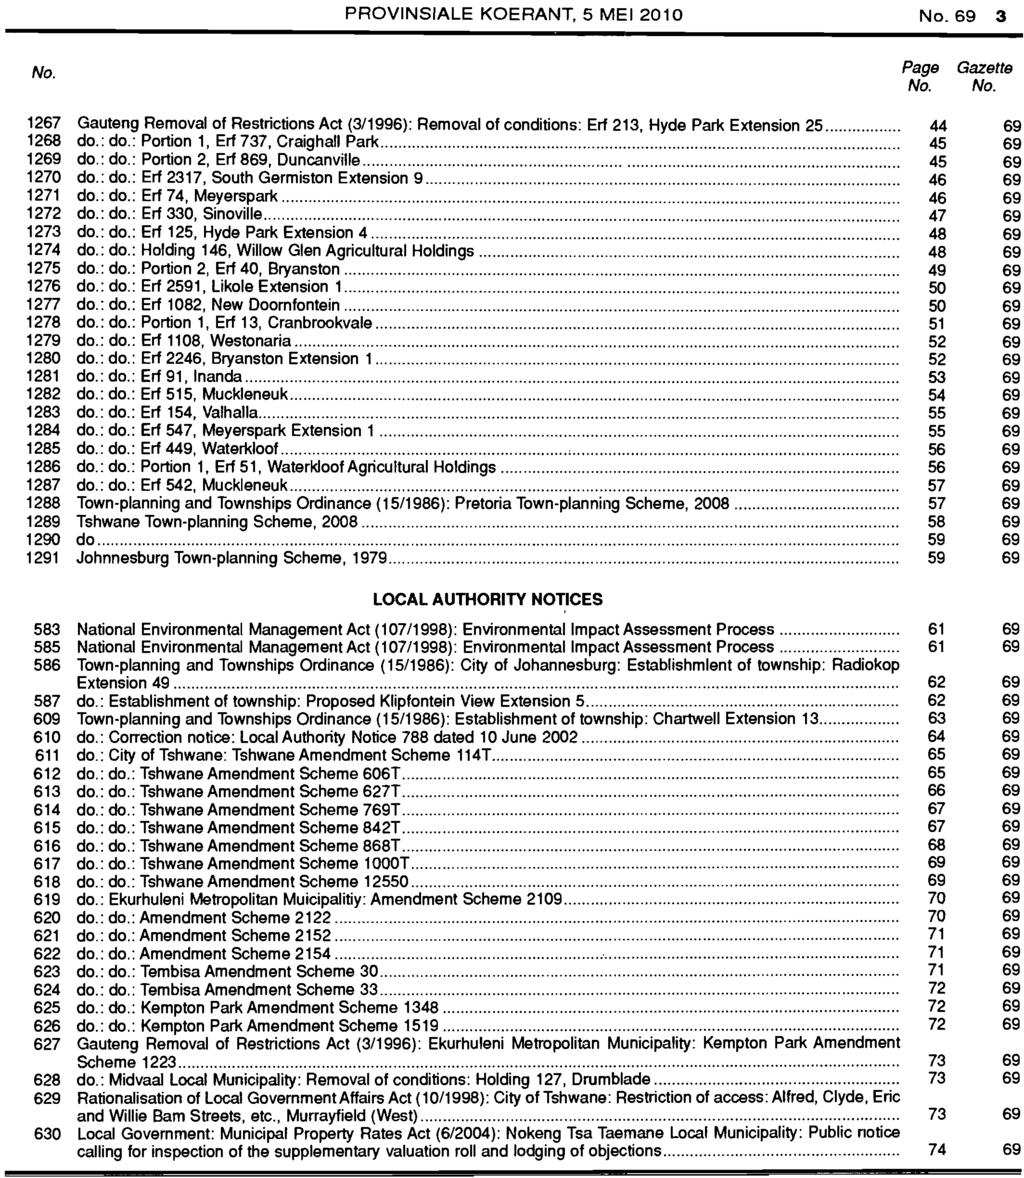 PROVINSIALE KOERANT, 5 MEl 2010 No. 69 3 No. Page No. Gazette No. 1267 Gauteng Removal of Restrictions Act (3/1996): Removal of conditions: Erf 213, Hyde Park Extension 25. 1268 do.: do.